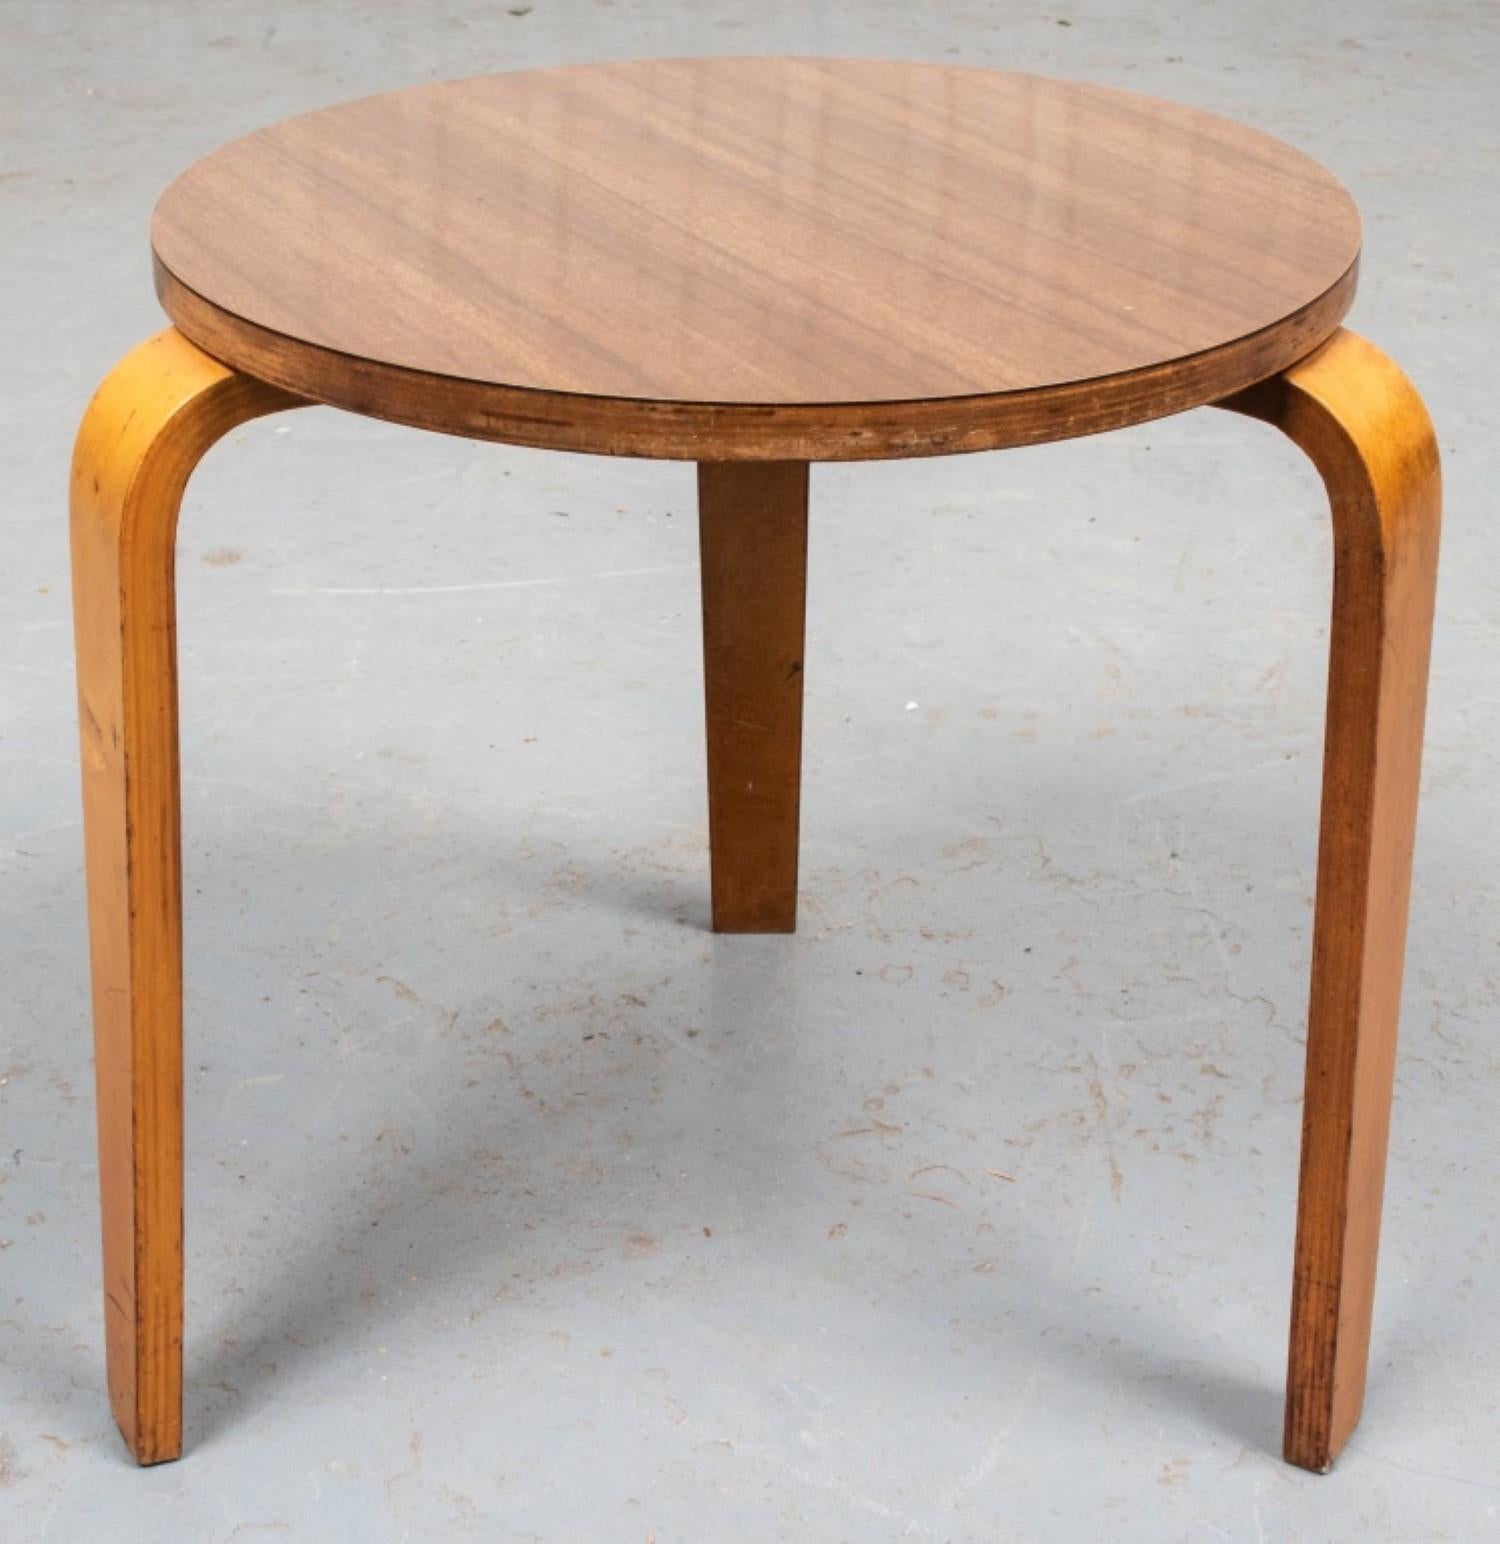 Scandinavian Modern Side/Occasional Table

Style: Scandinavian Modern
Design: Inspired by the Model 60 stacking stool by Alvar Aalto (Finnish 1898-1976)
Features: Round laminate top over three L-form teak legs.

Dimensions: 15.5